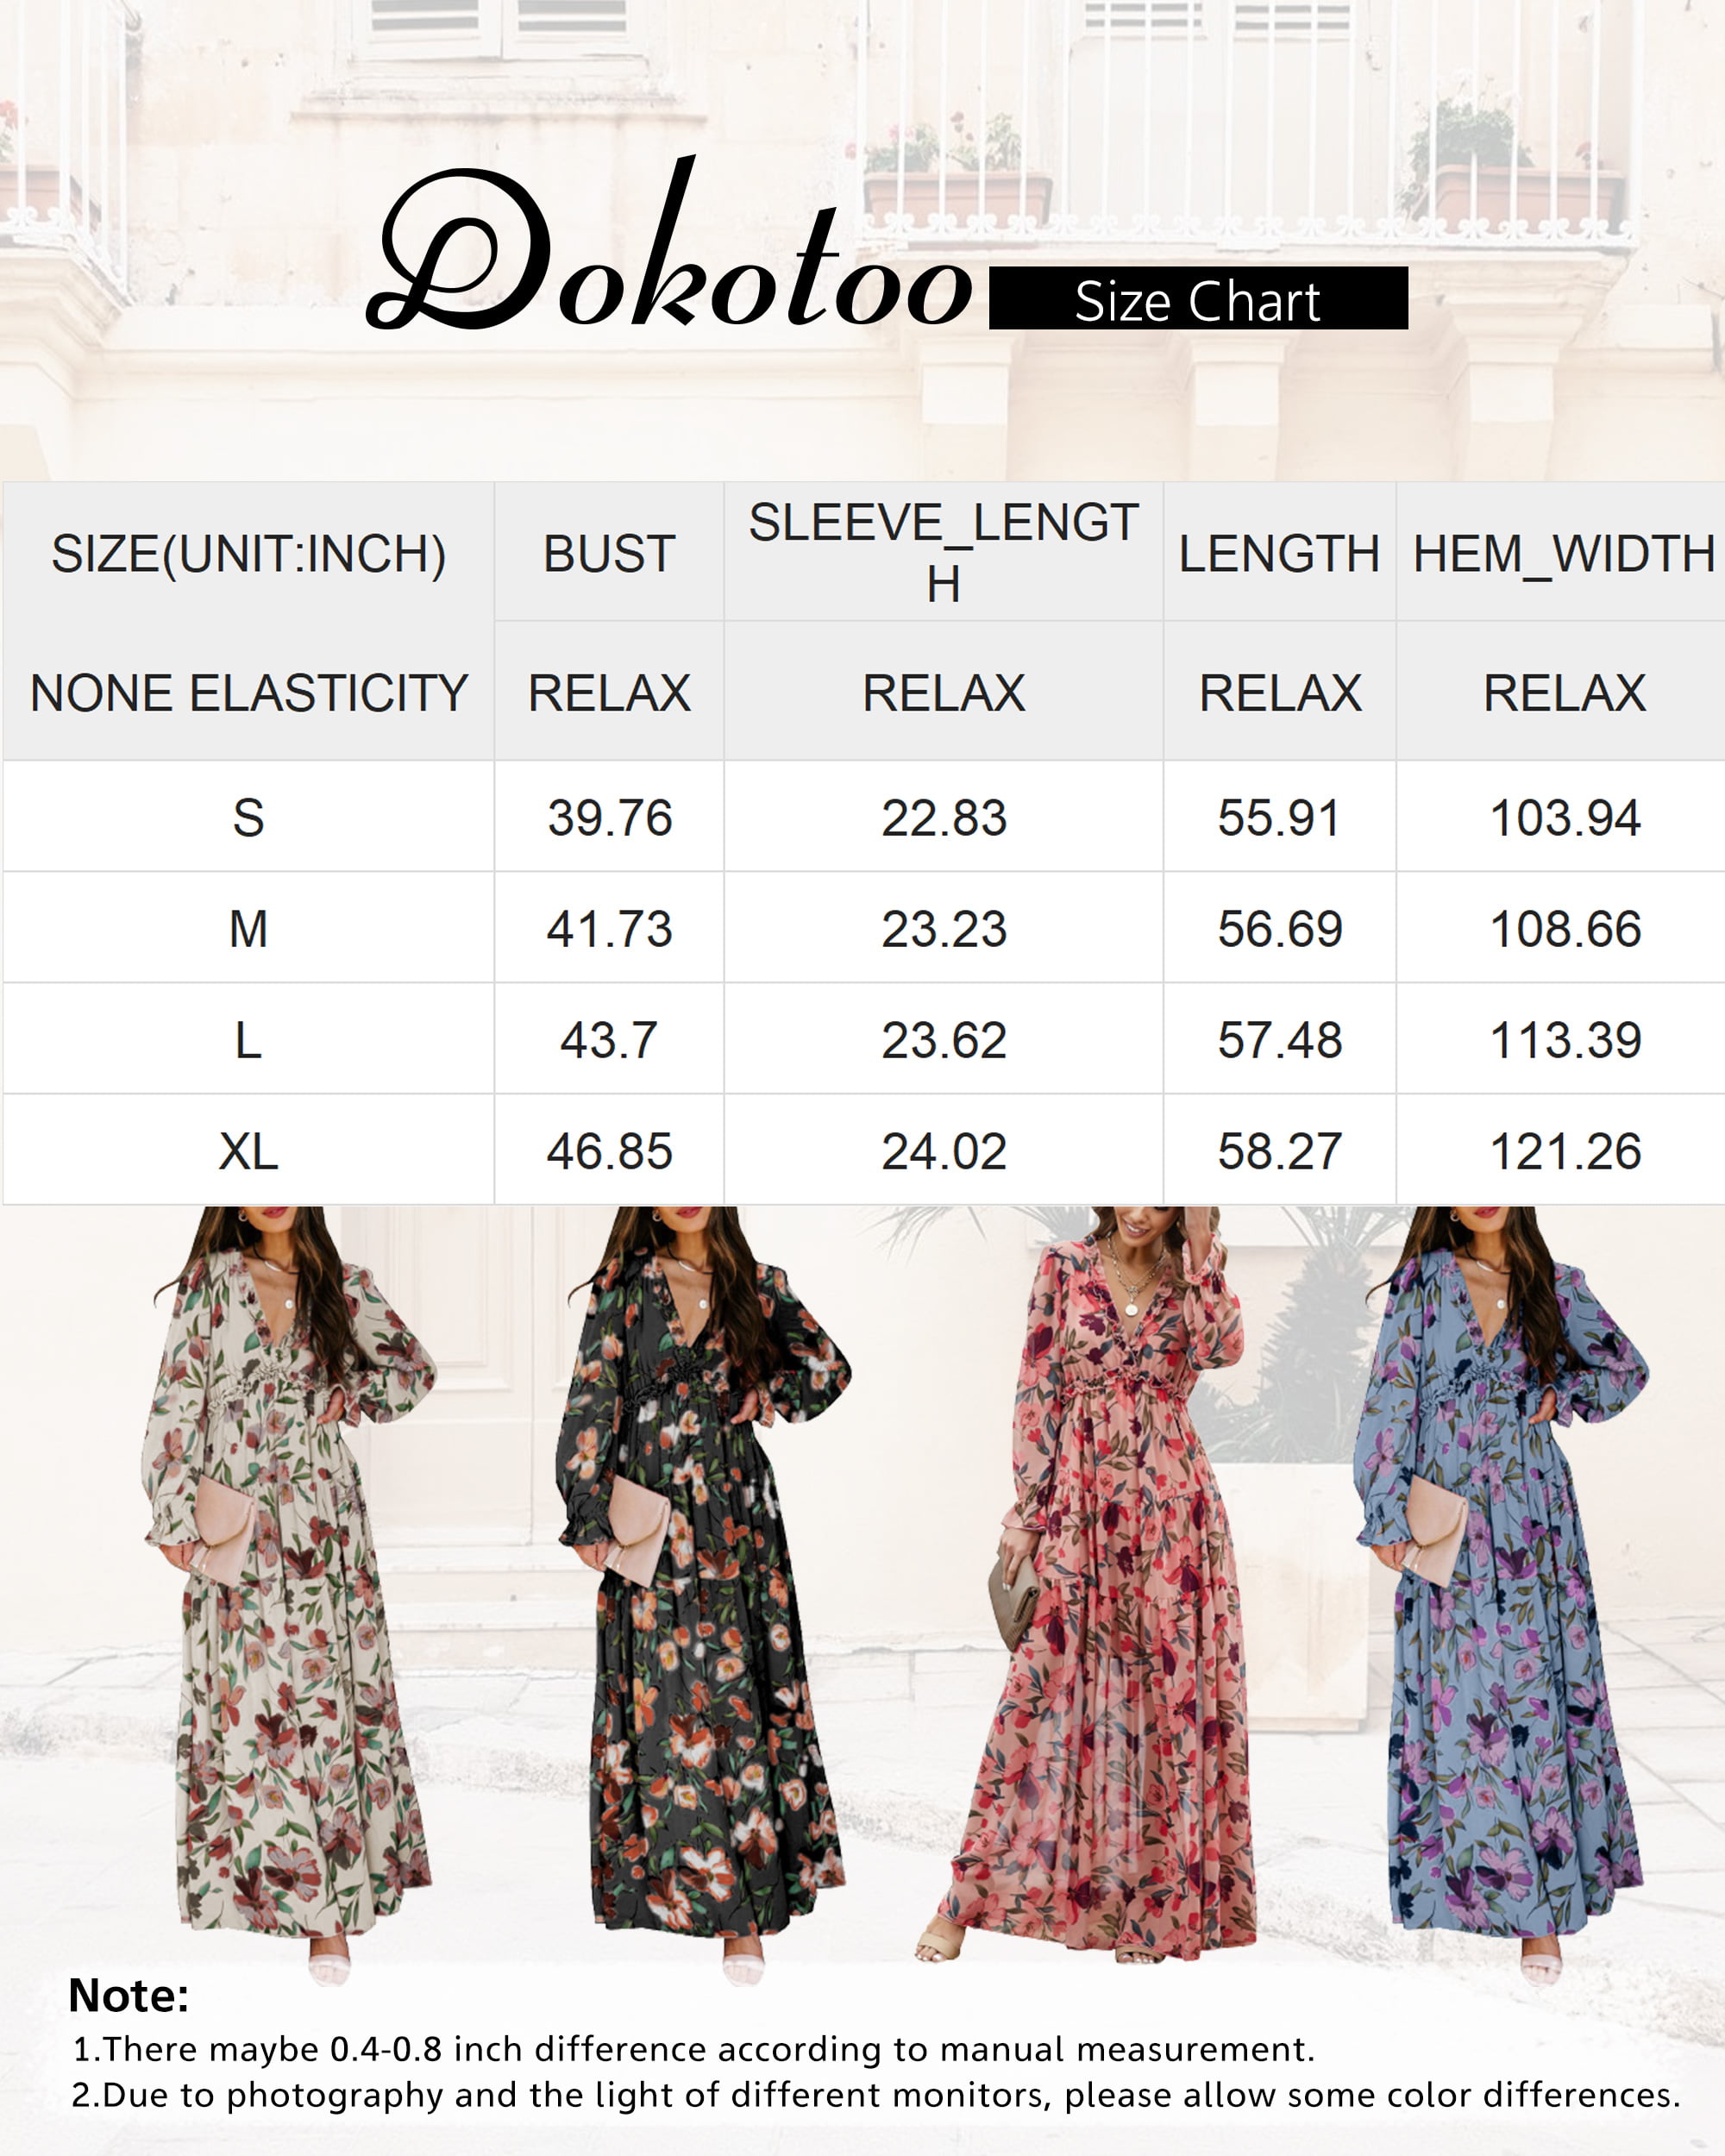 Dokotoo Women's Apricot Floral Maxi Dresses Casual Deep V Neck Long Sleeve Evening Dress Cocktail Party Dress for Women, US 16-18(XL) - image 3 of 8